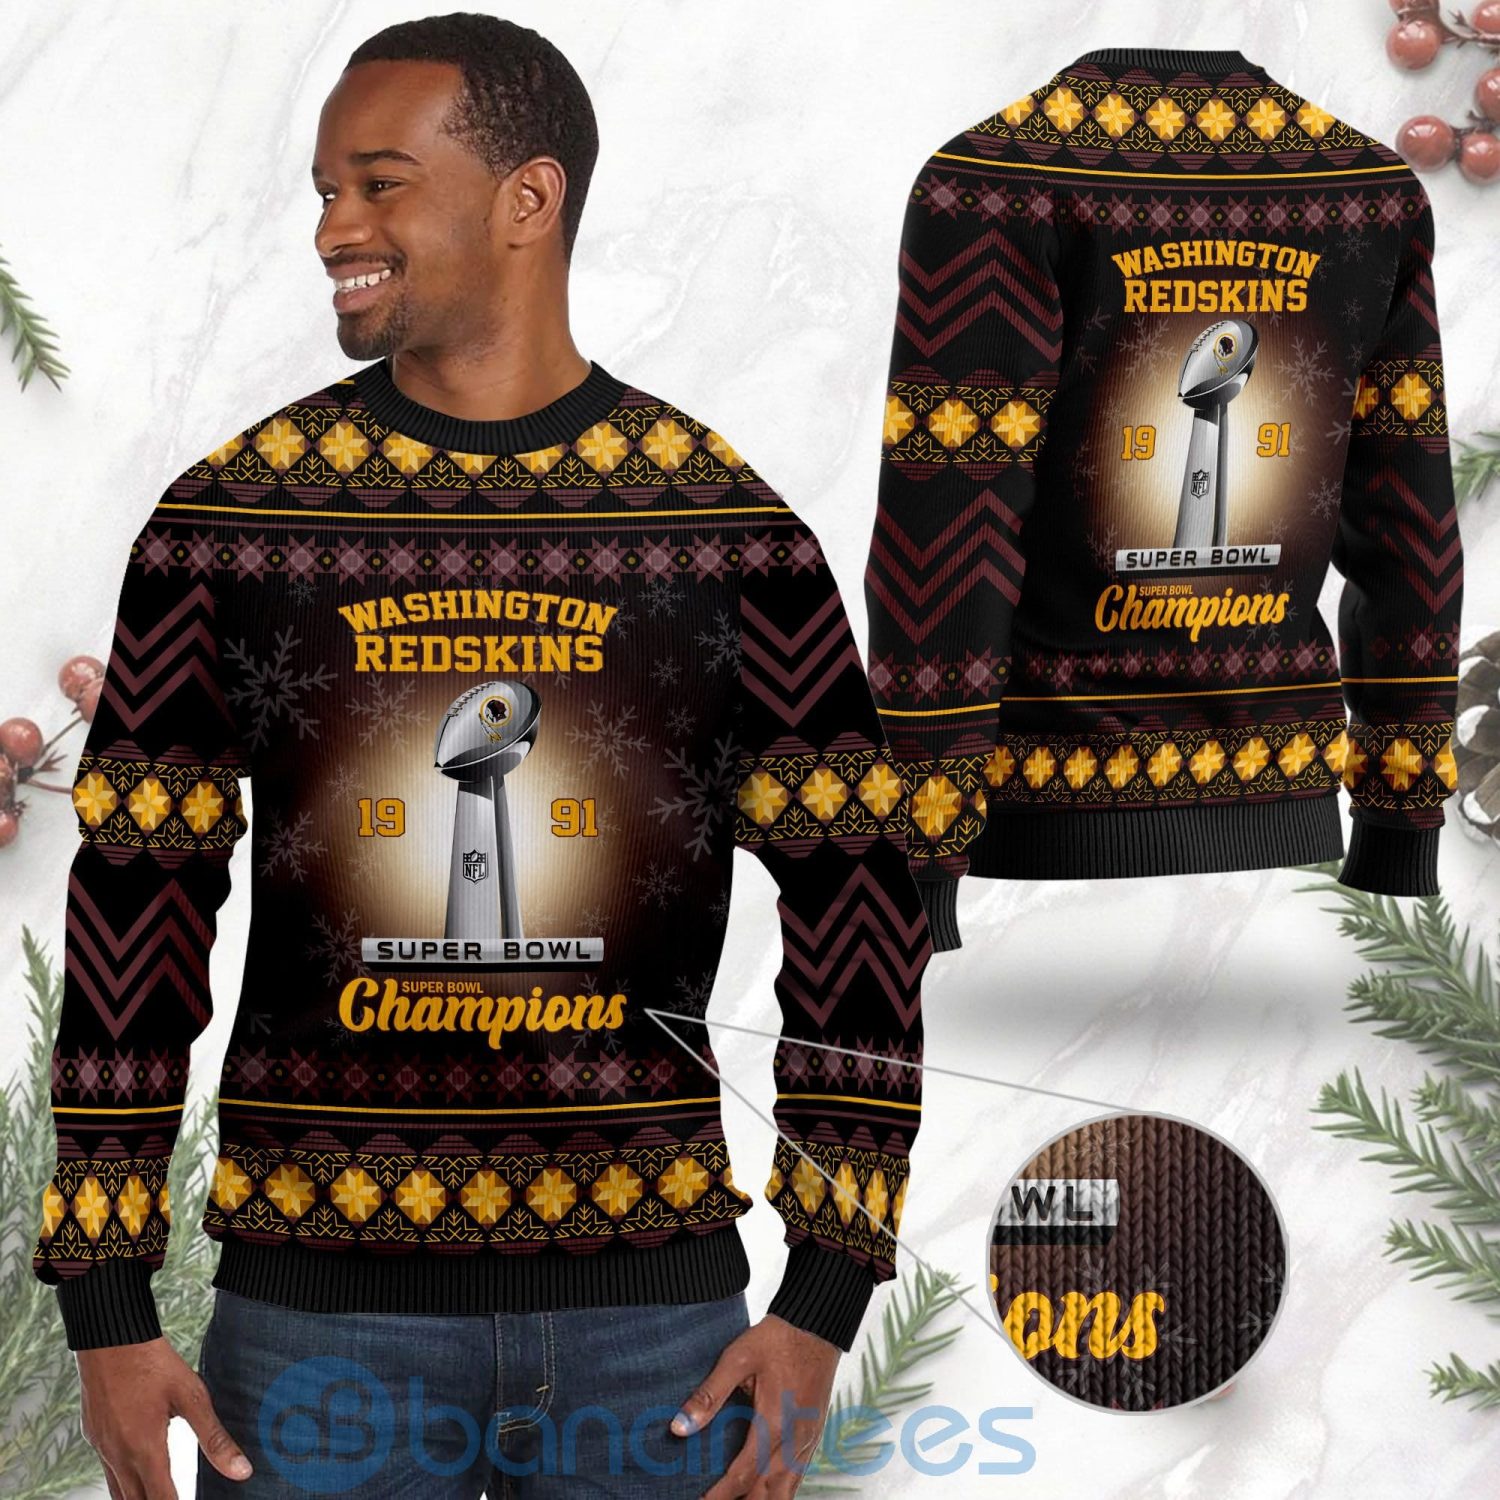 Washington Redskins Super Bowl Champions Cup Ugly Christmas 3D Sweater